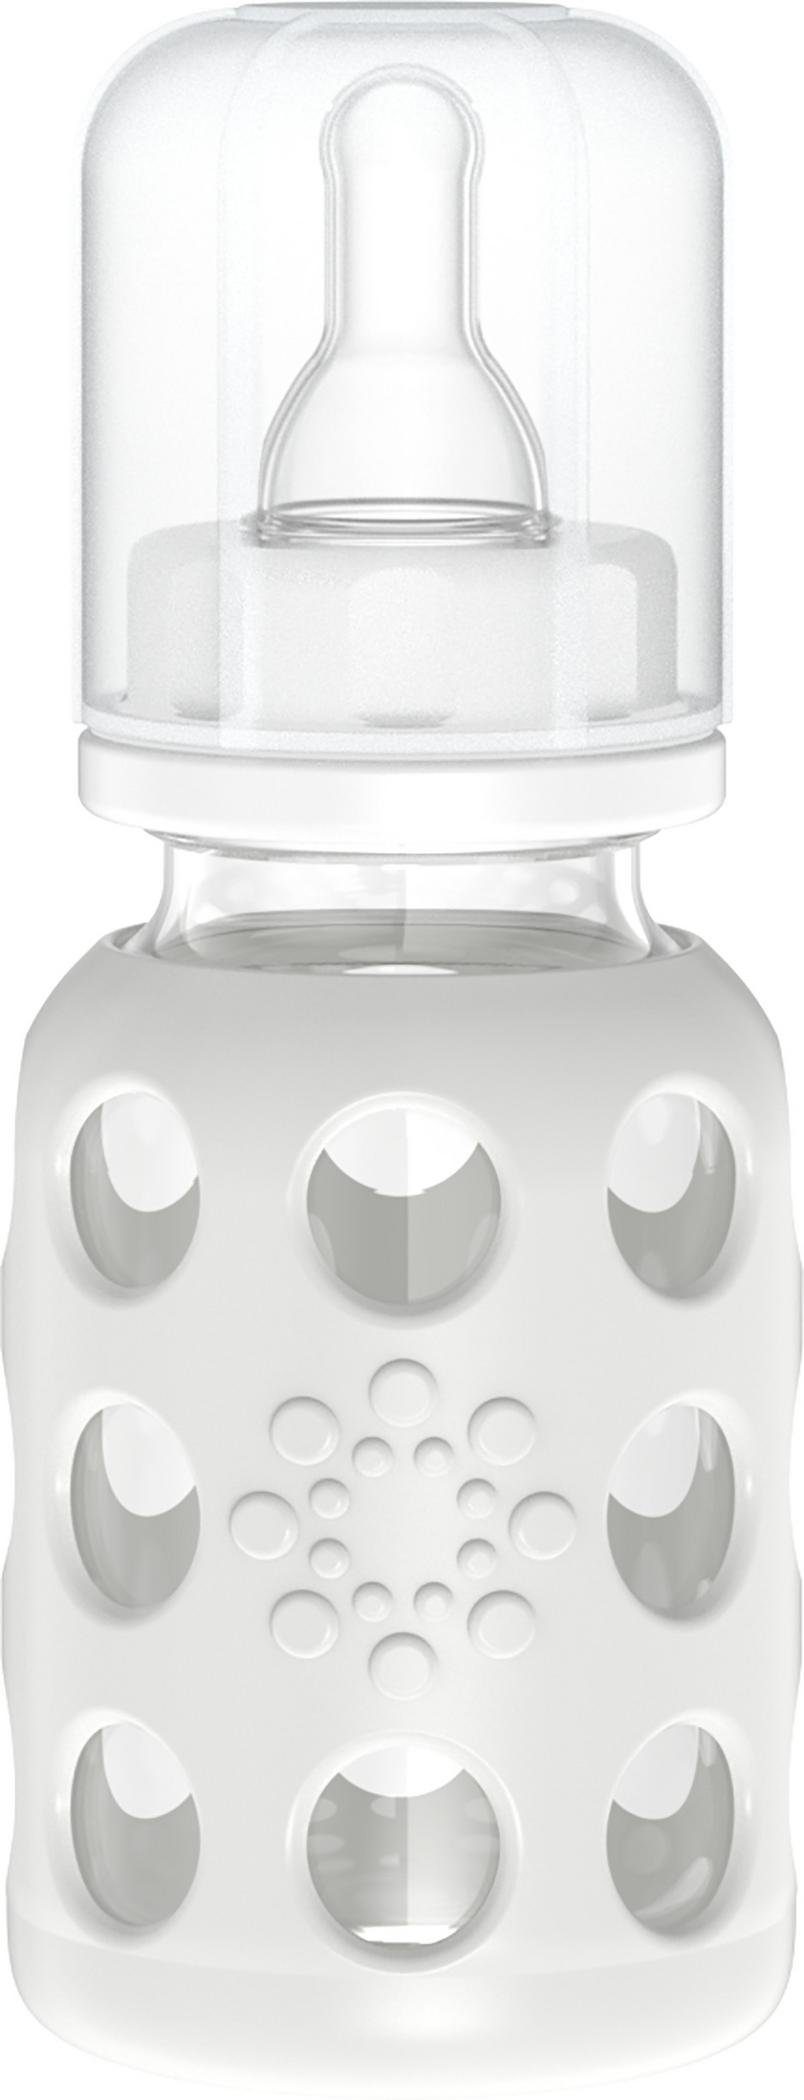 Lifefactory Monate) inkl. Glasflasche Cool Grey (0-3 Silikonsauger Babyflasche, 120ml, 1 Gr.